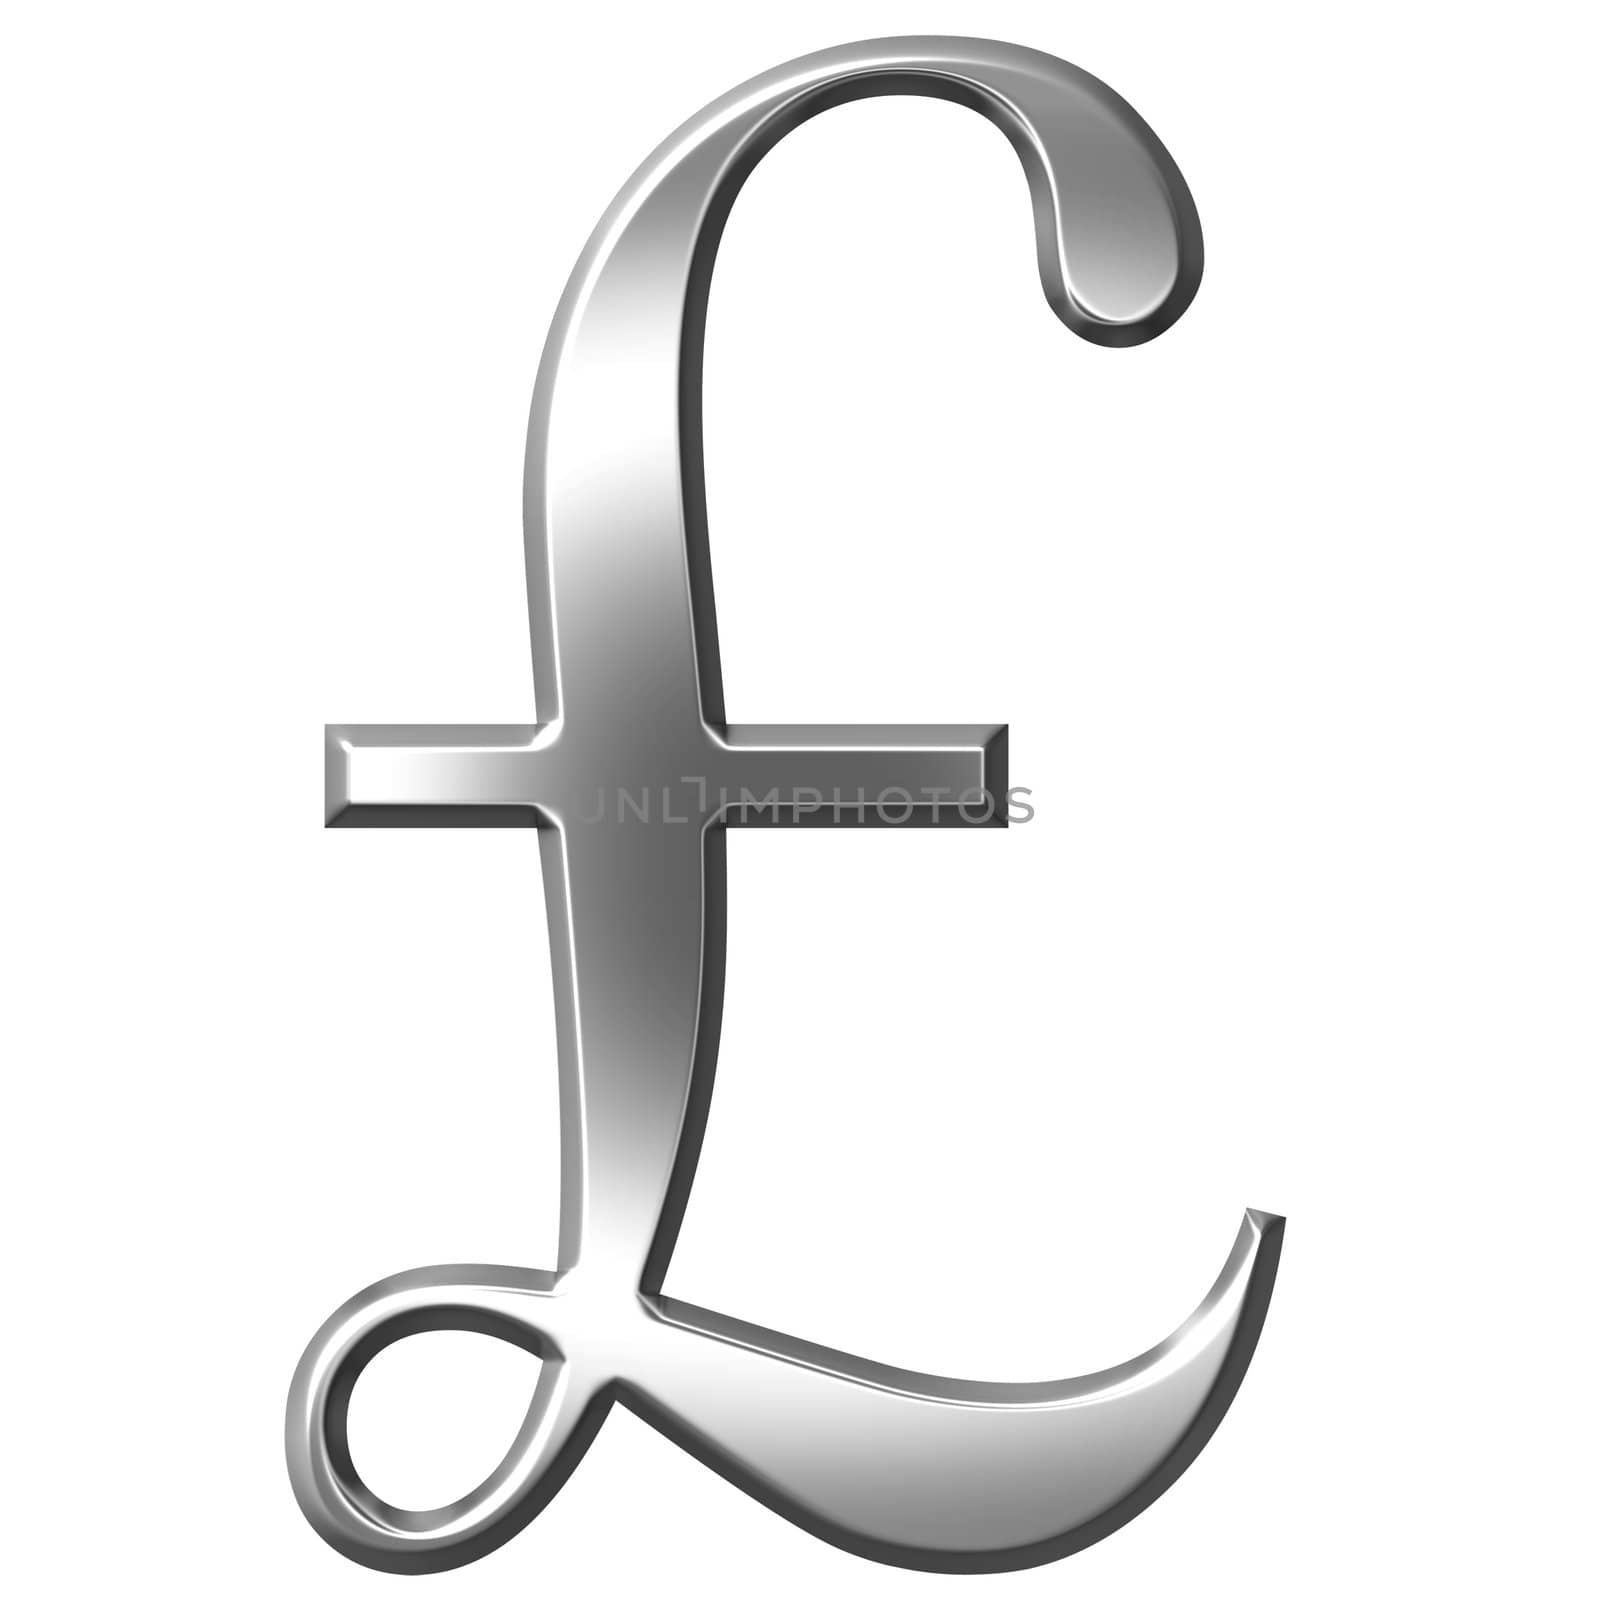 3d silver pound symbol isolated in white